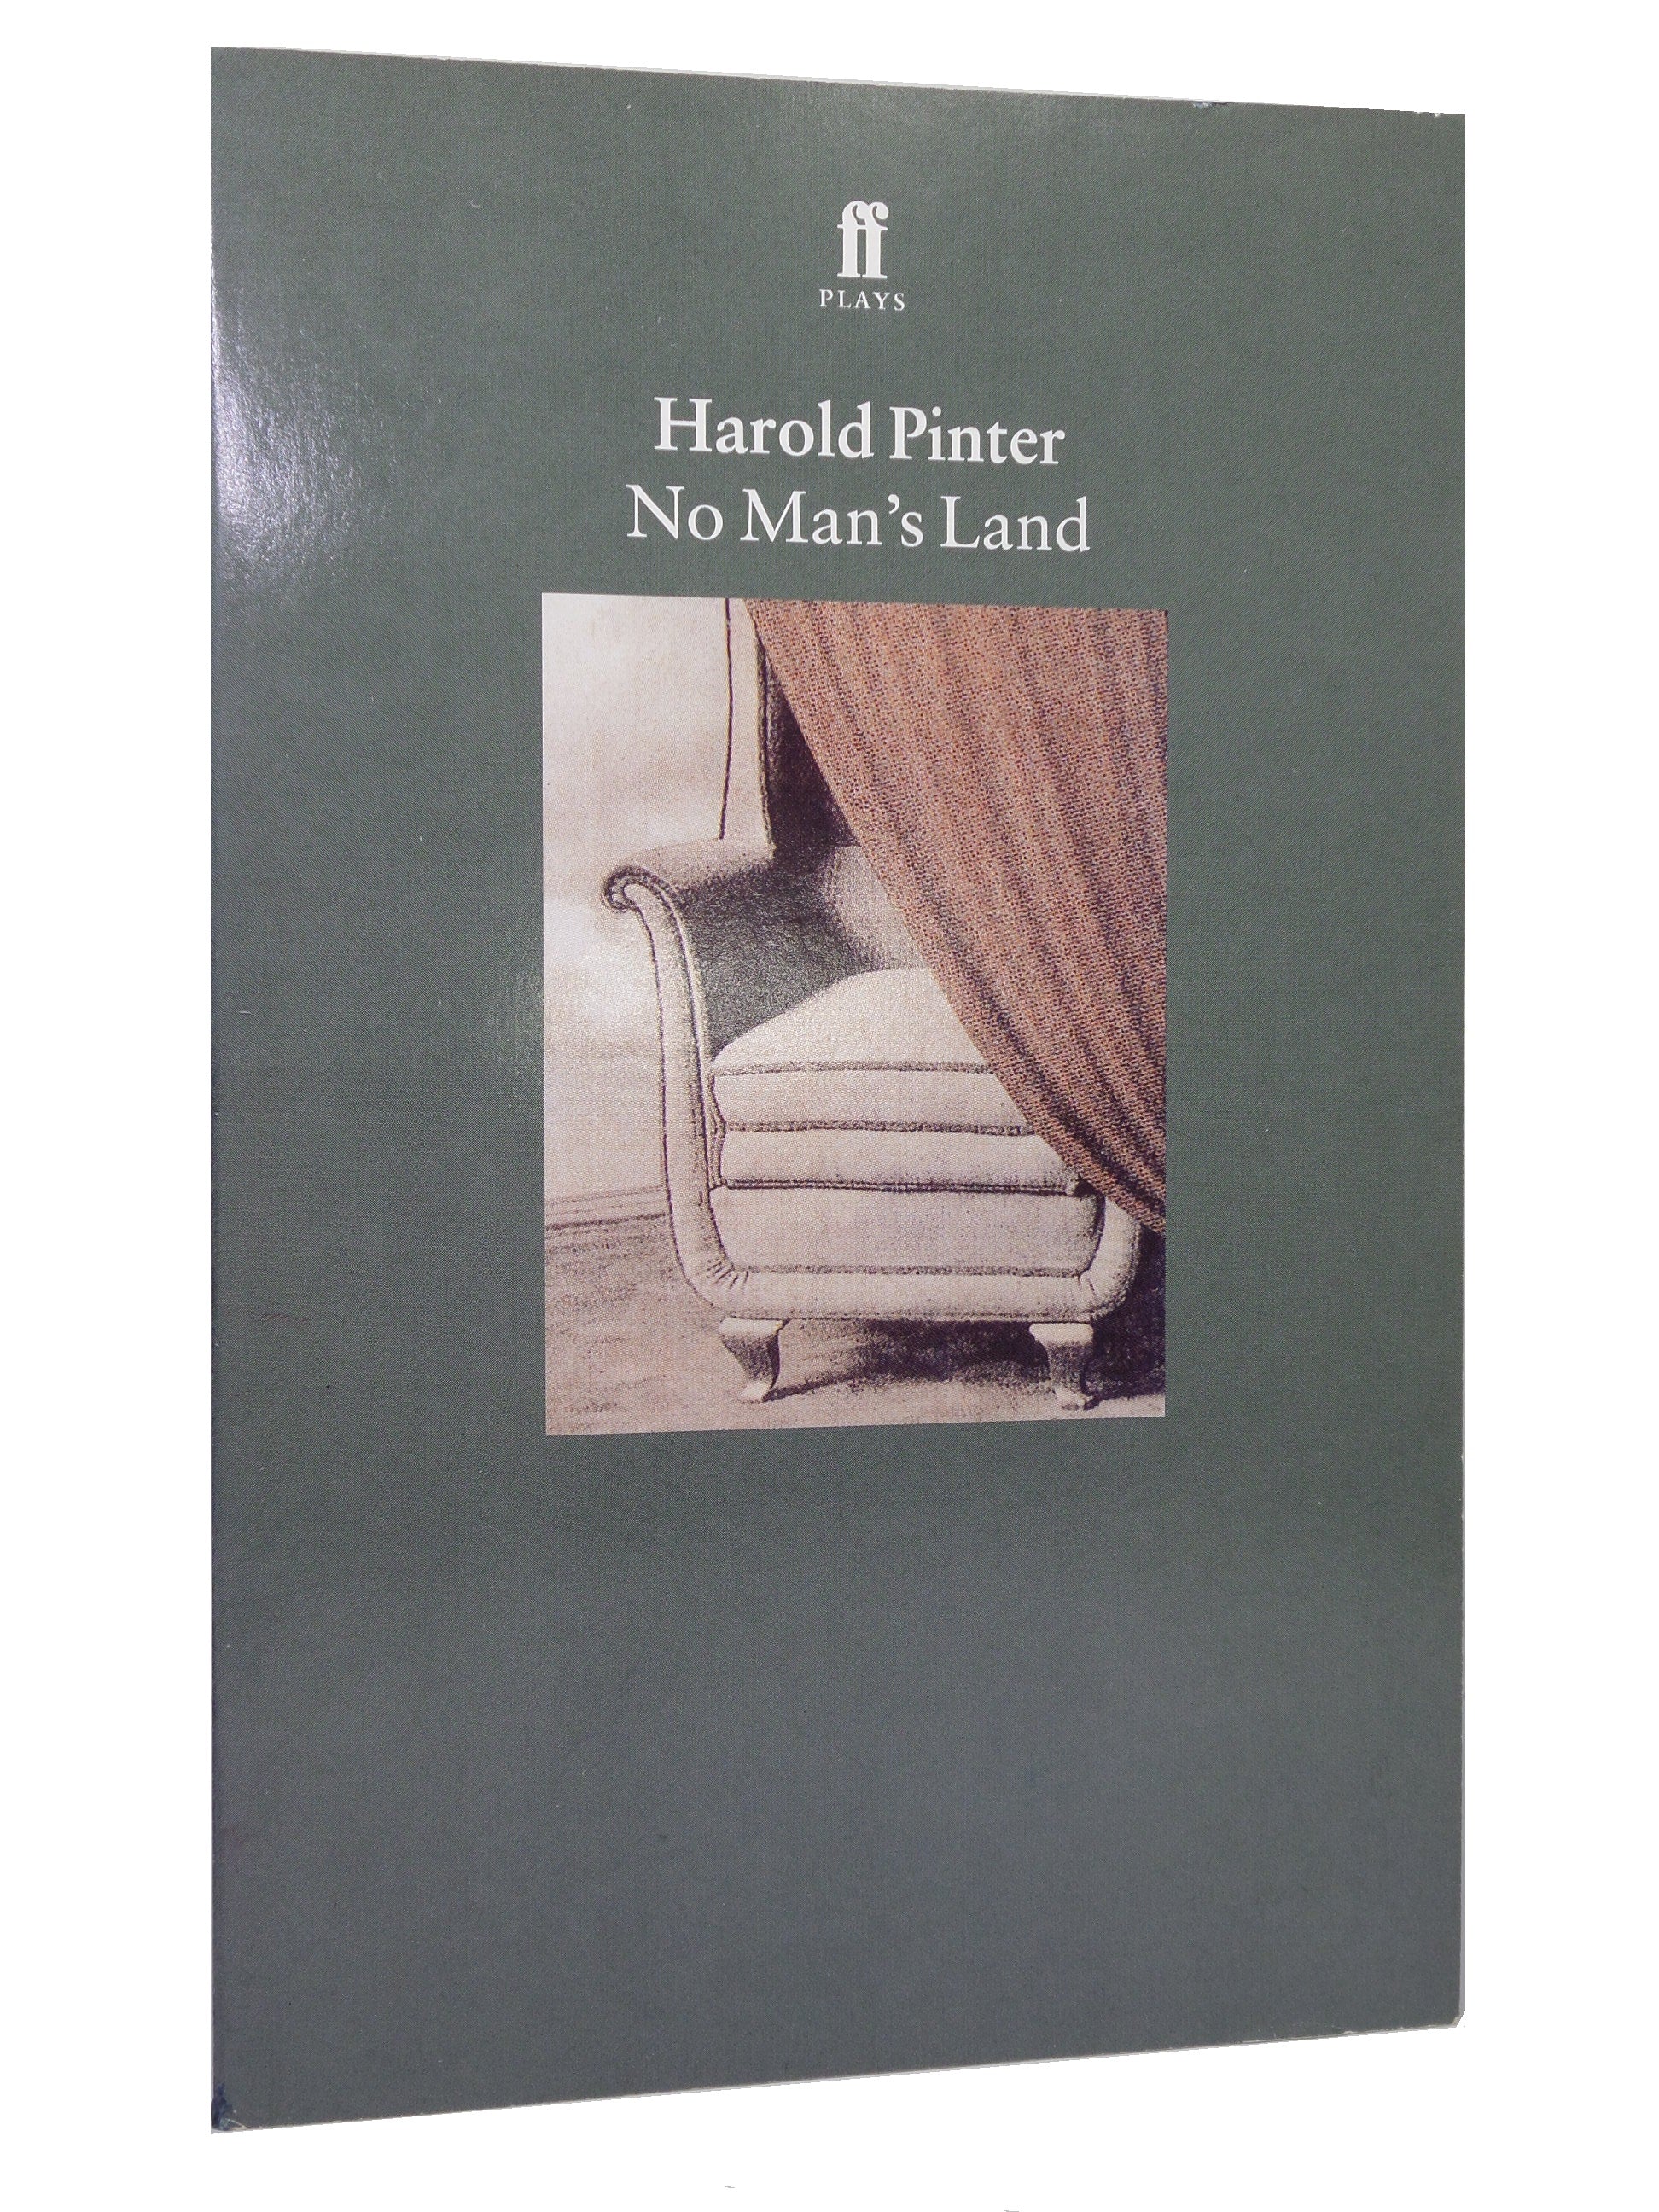 NO MAN'S LAND BY HAROLD PINTER 1991 SIGNED SOFTCOVER EDITION